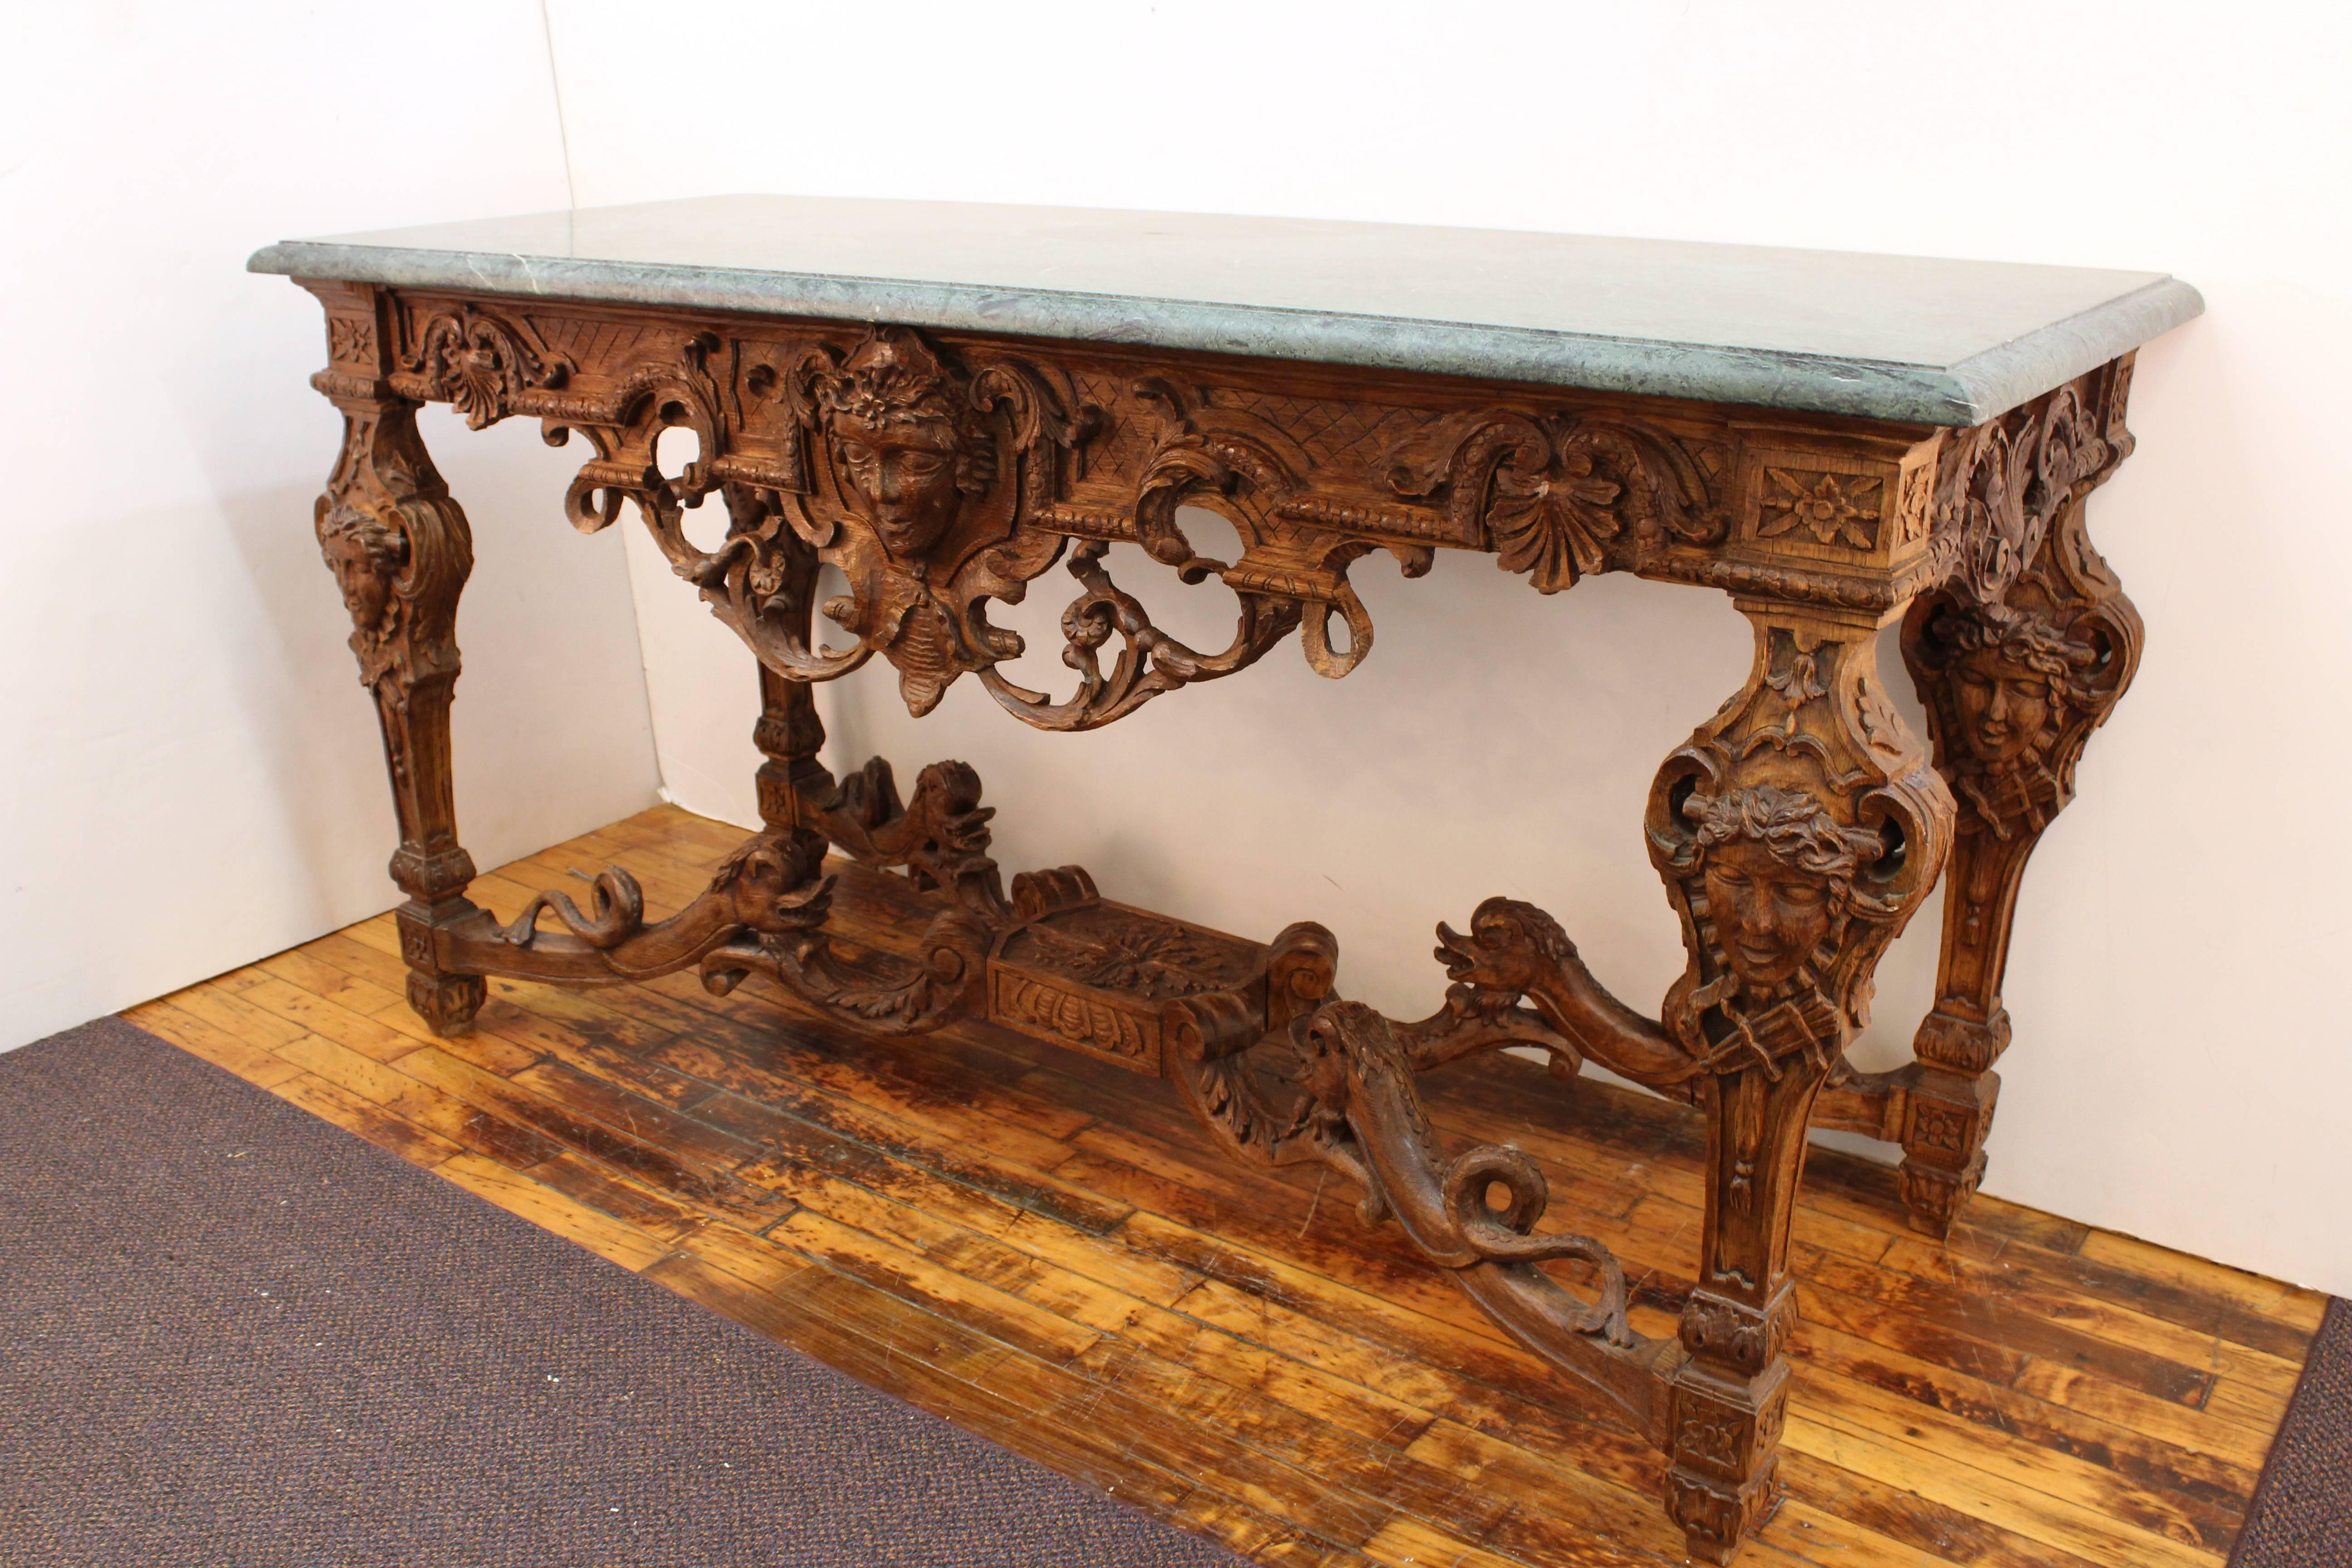 An antique Louis XIV style console table in untreated wood. Sculpted with faces, scroll work, architectural elements, dolphins, acanthus leaves and other flora. The table top is made of green marble. Wear consistent with age and use. In good